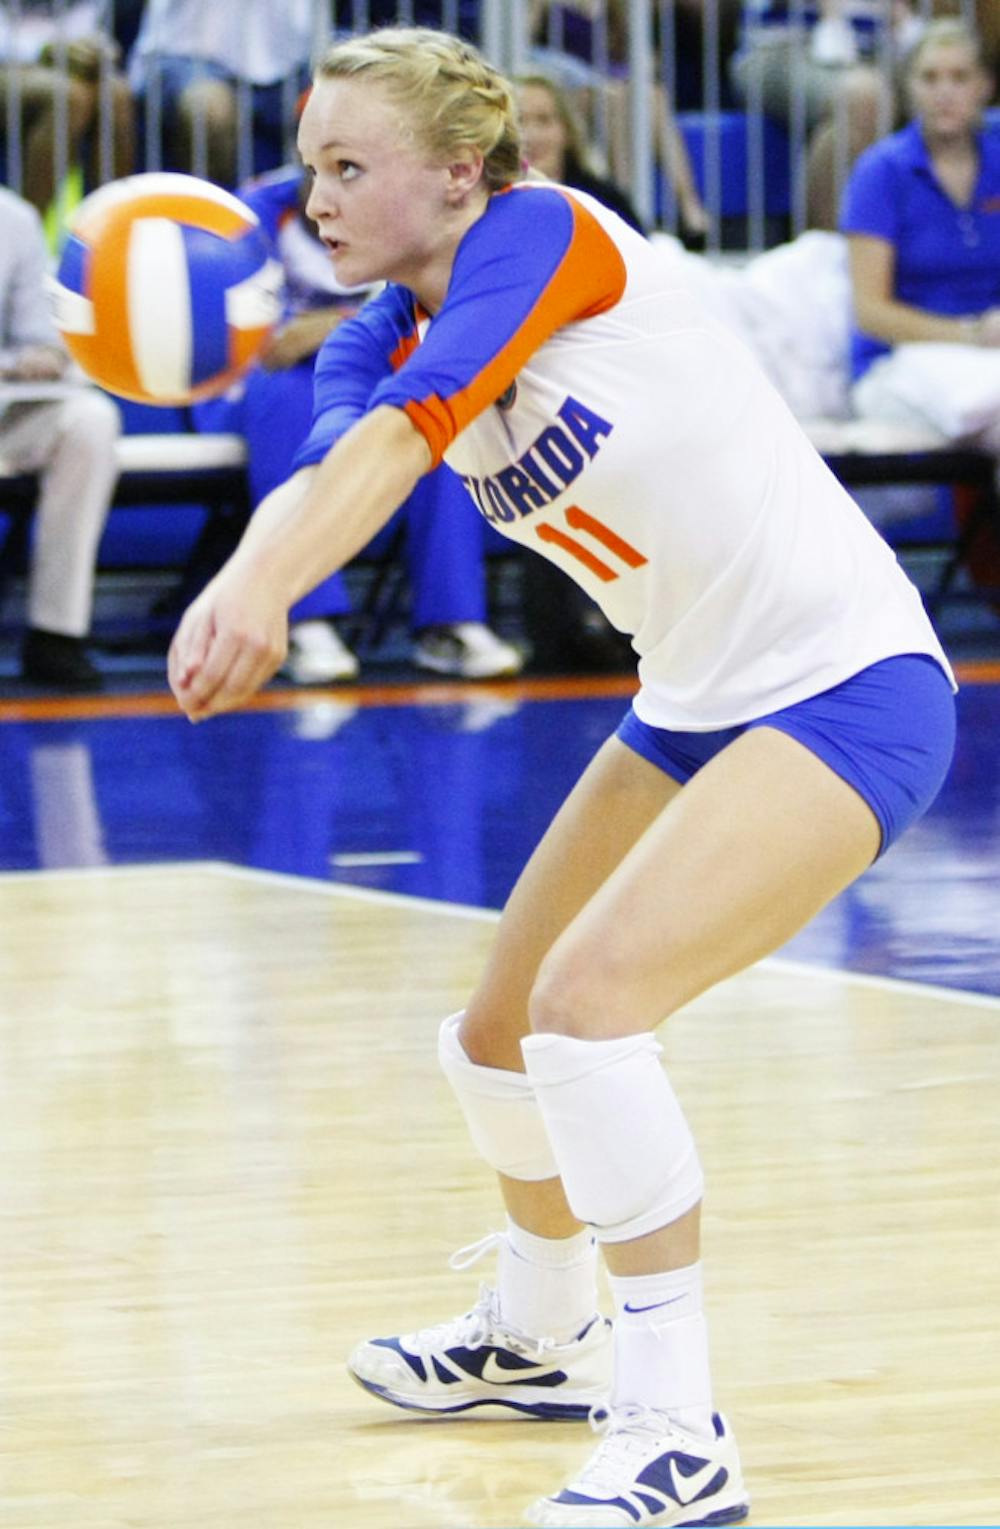 <p>Sophomore Madison Monserez (11) attempts a pass during UF’s 3-0 win against FIU on Aug. 24, 2012, in the O’Connell Center.</p>